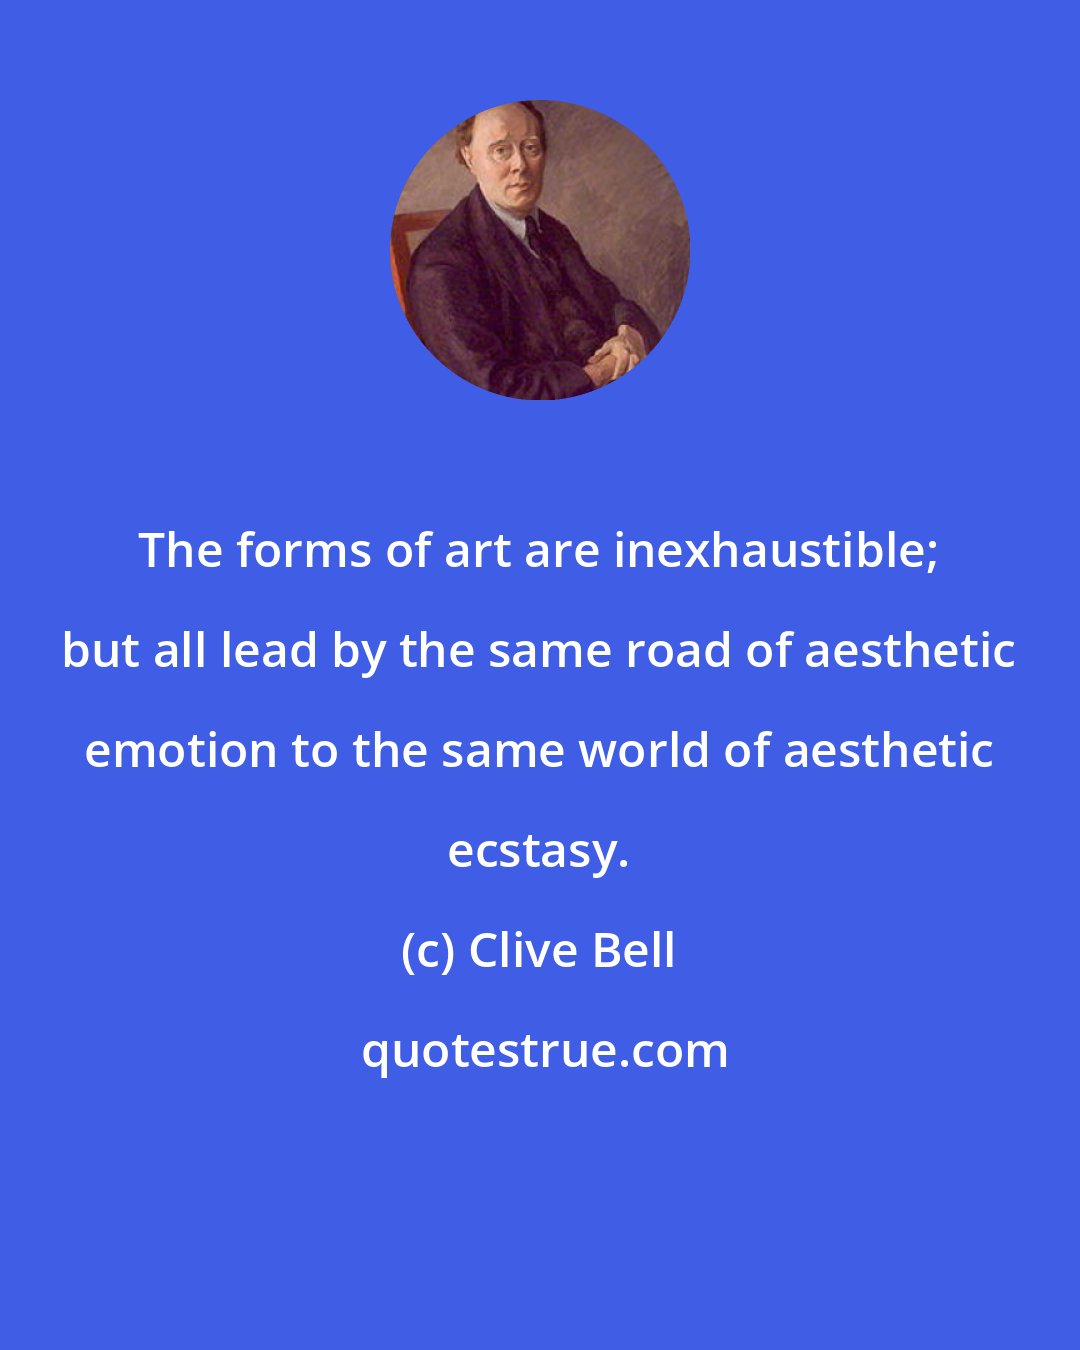 Clive Bell: The forms of art are inexhaustible; but all lead by the same road of aesthetic emotion to the same world of aesthetic ecstasy.